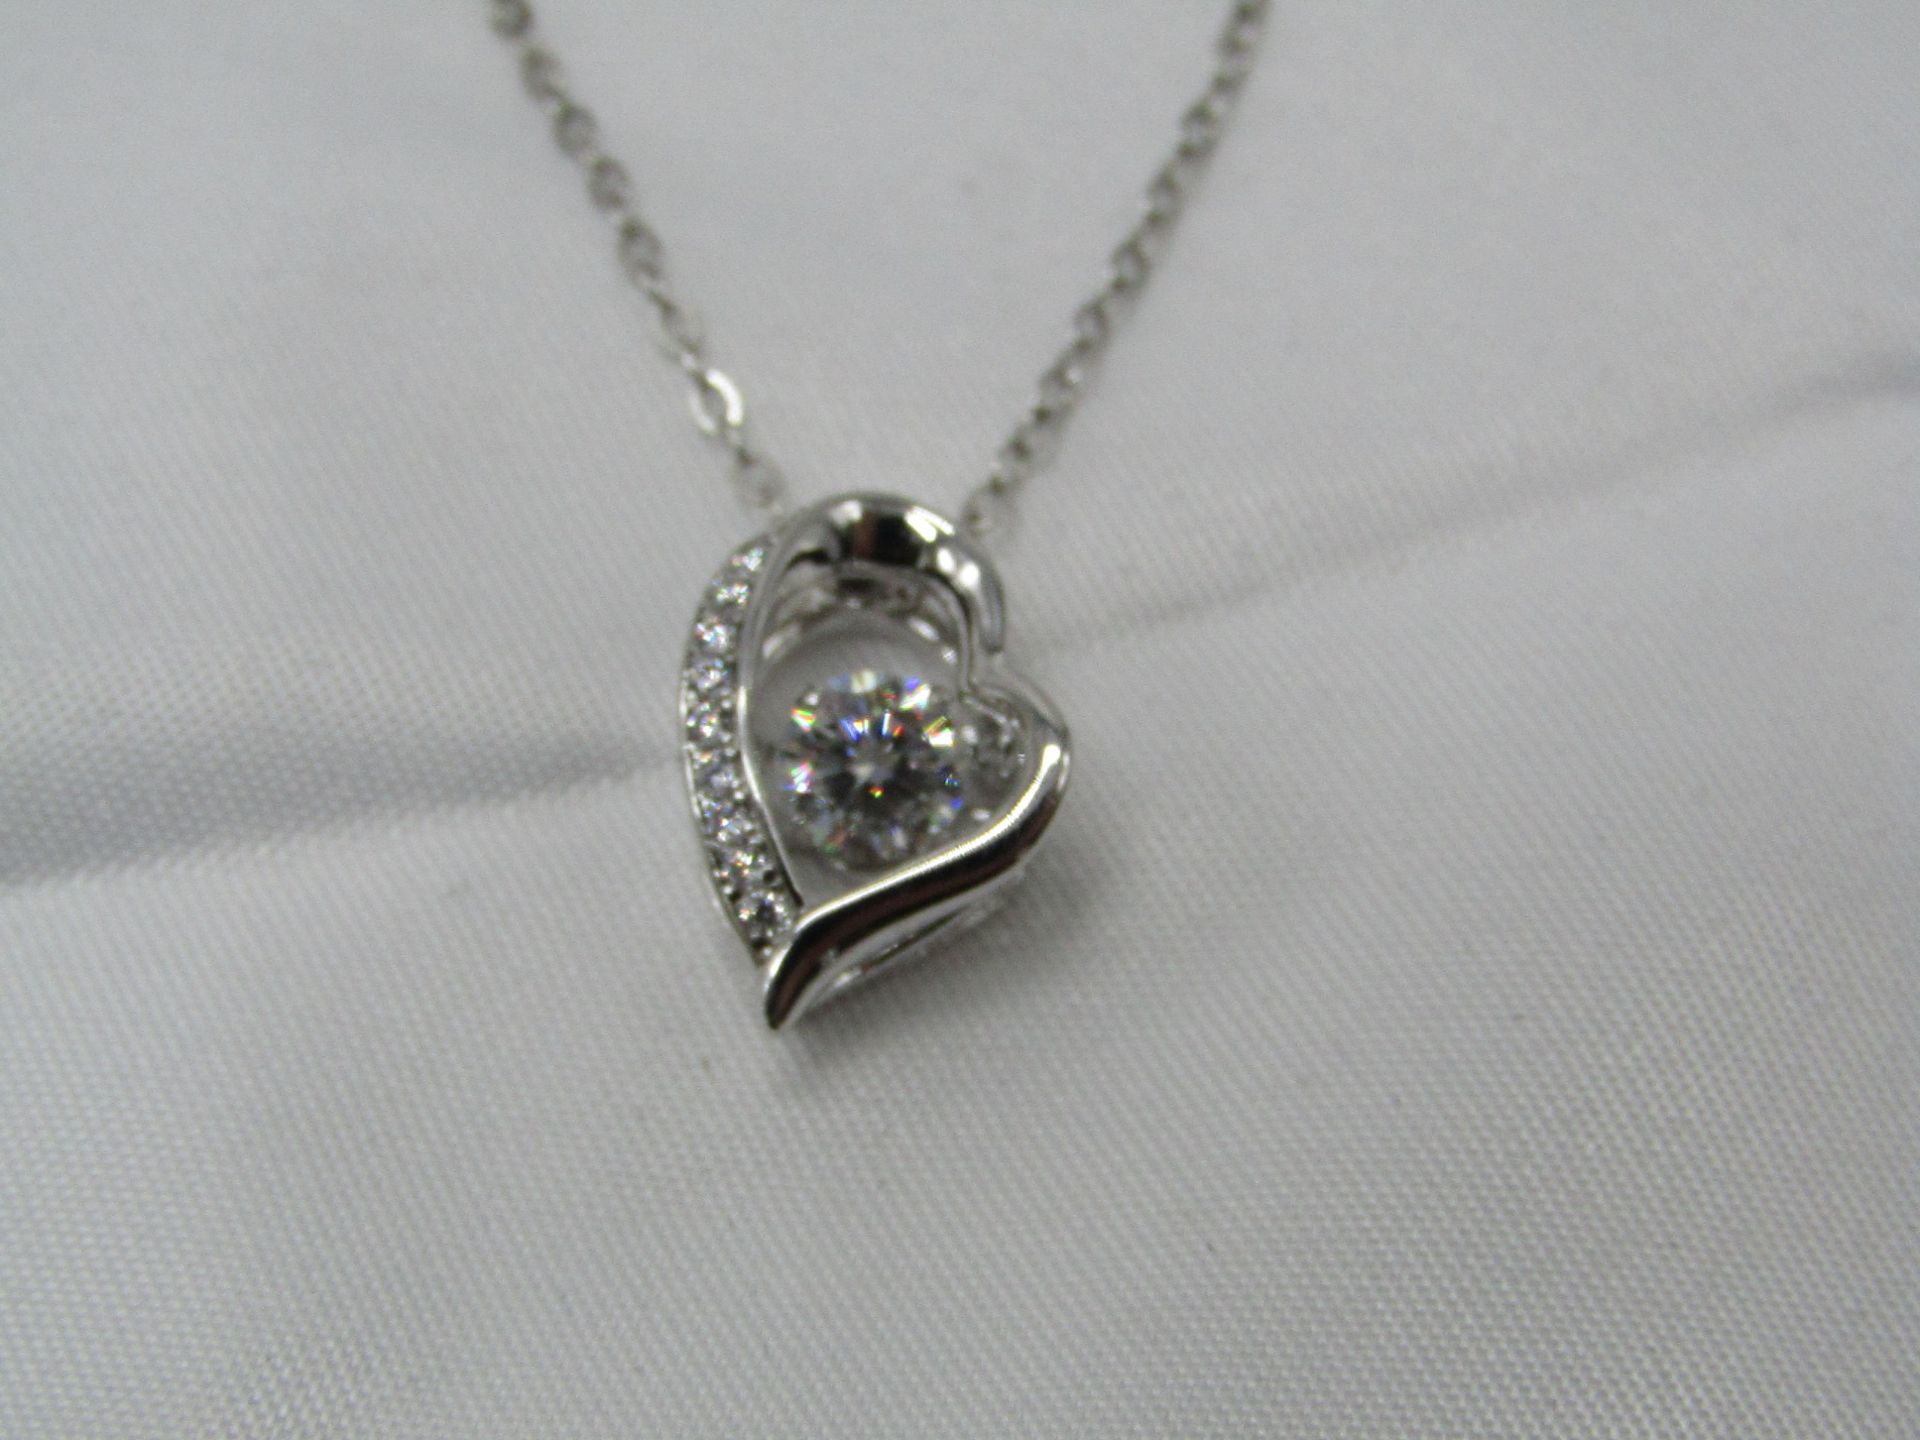 0.5 Carat Round Brilliant Cut Moissanite stone in a 925 Silver setting and Necklace, new and comes